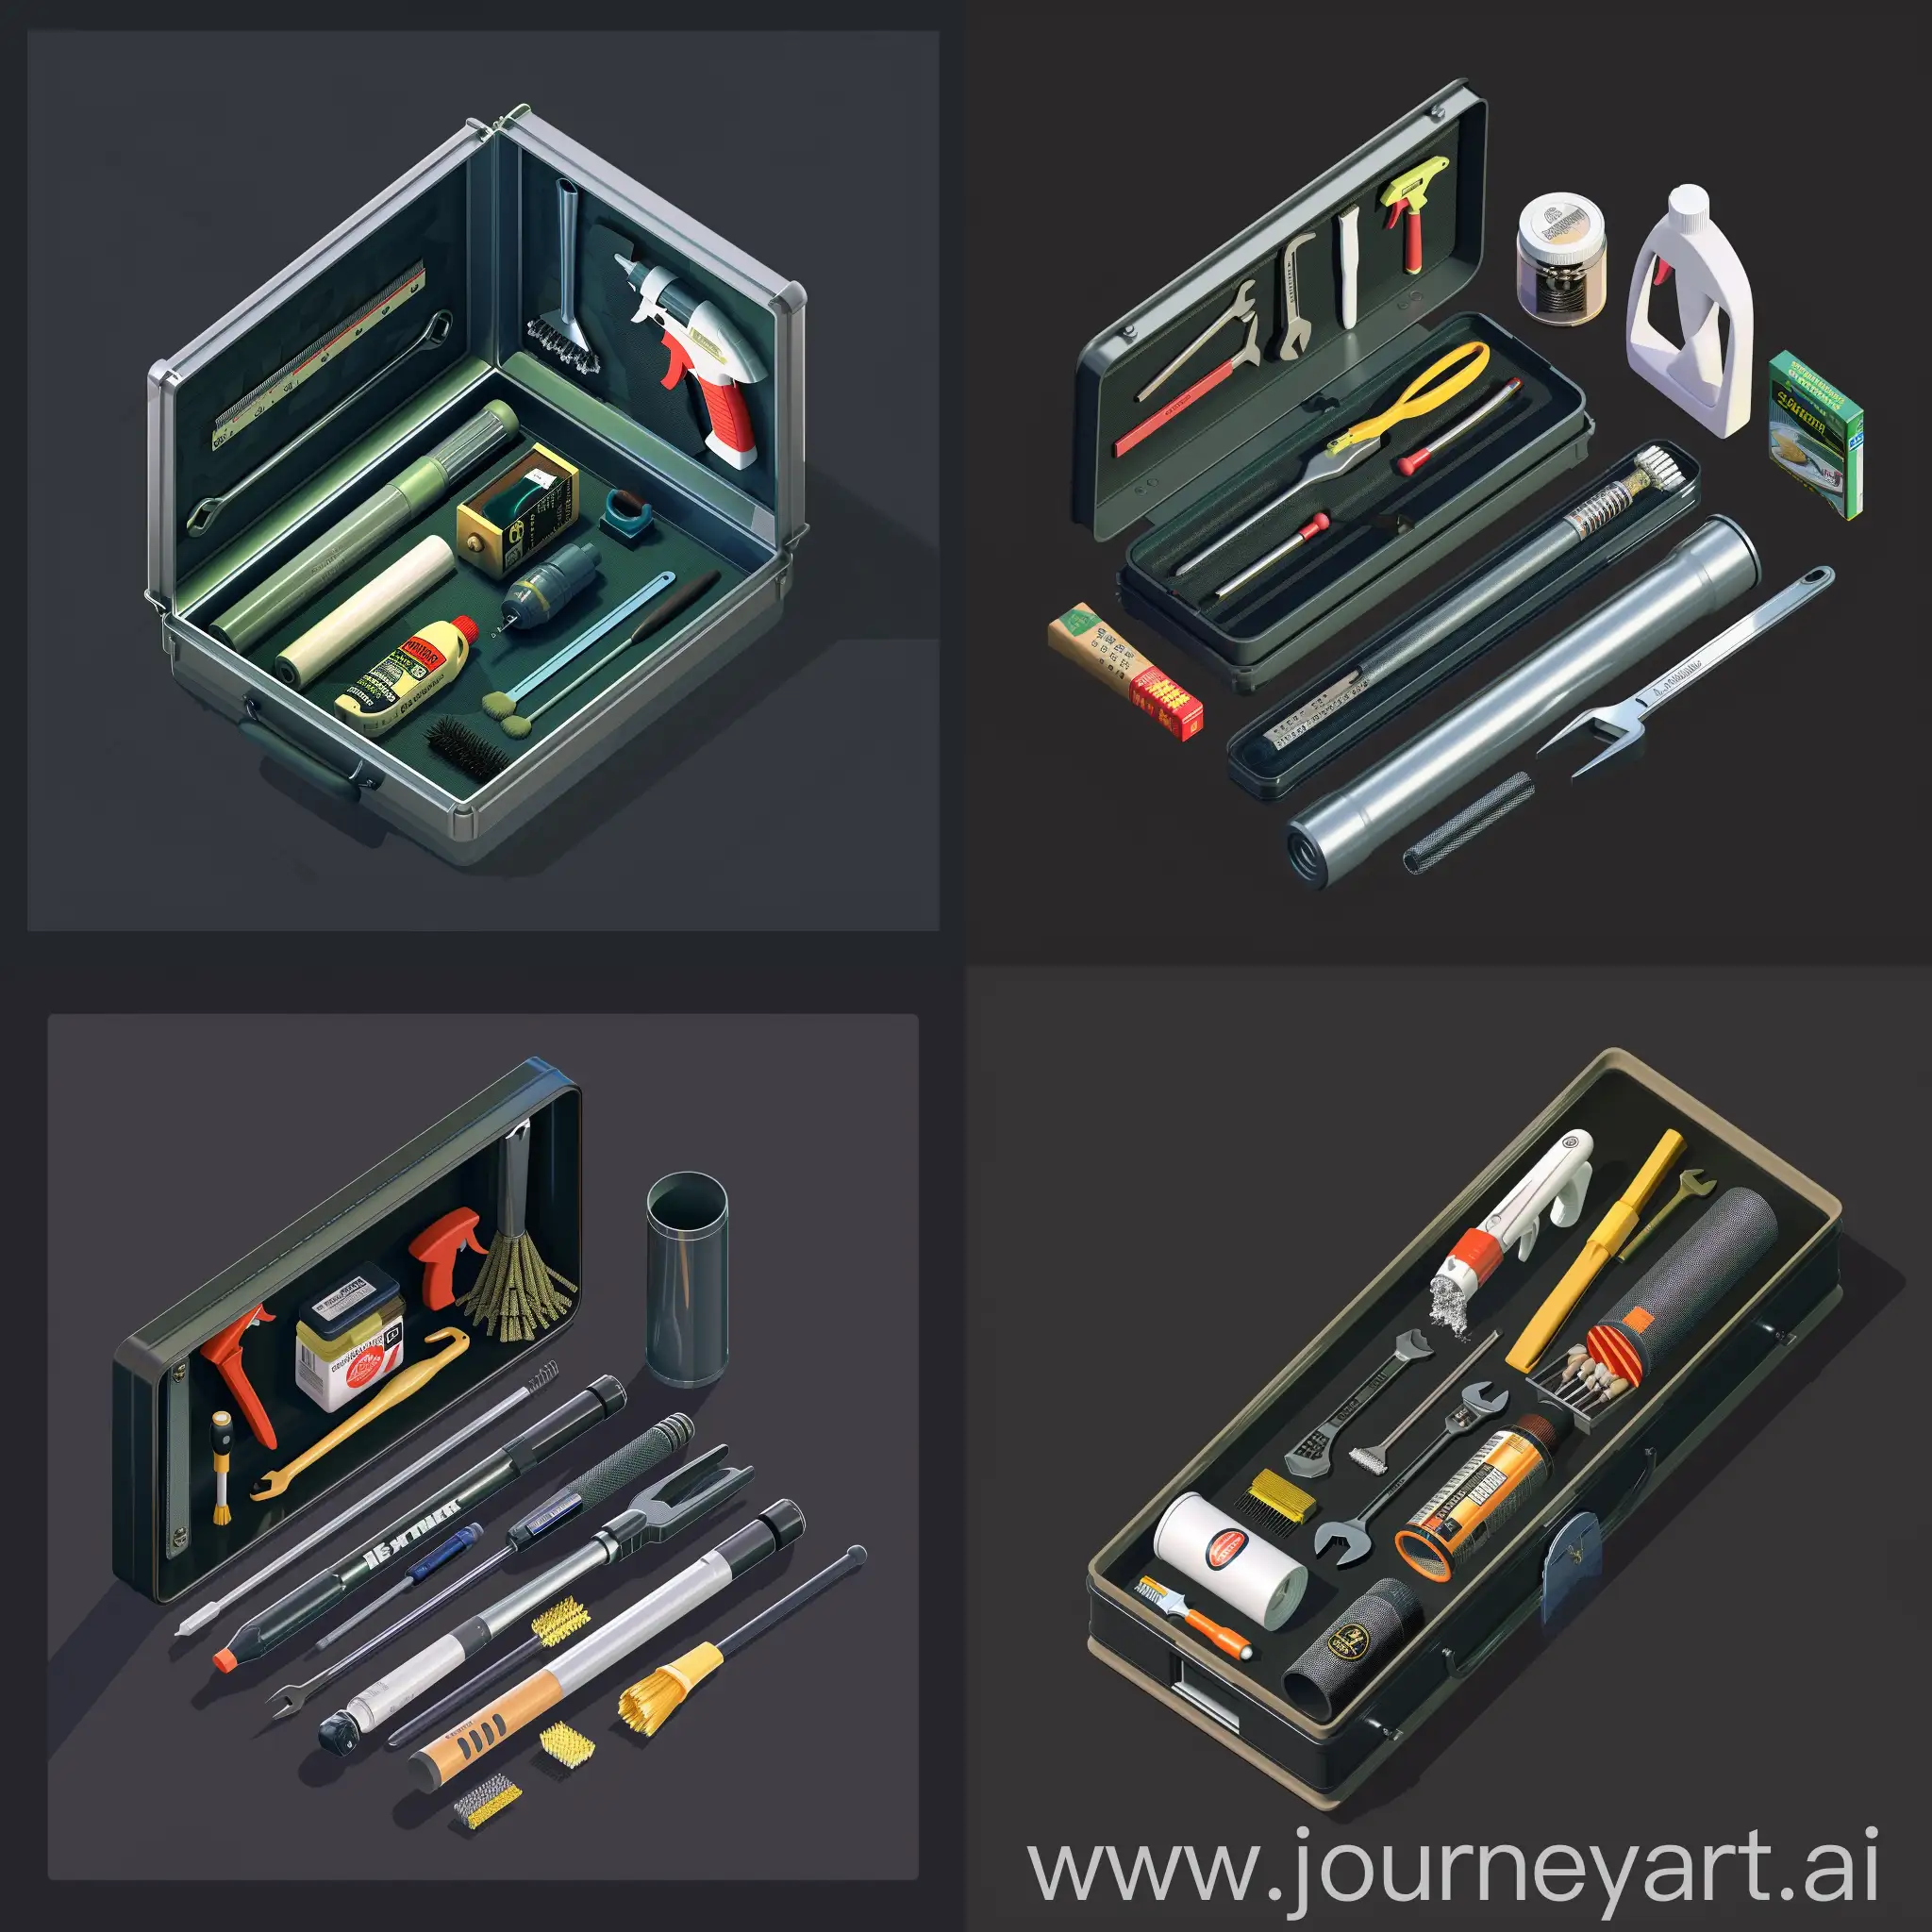 https://i.imgur.com/xMBDPmY.png isometric set of repair instruments industrial cleaning kit inside tiny very thin cylinder metal box in style of unreal engine 5, tools instruments grease cleaning kit, ultrarealistic style, isometric set, hard surface